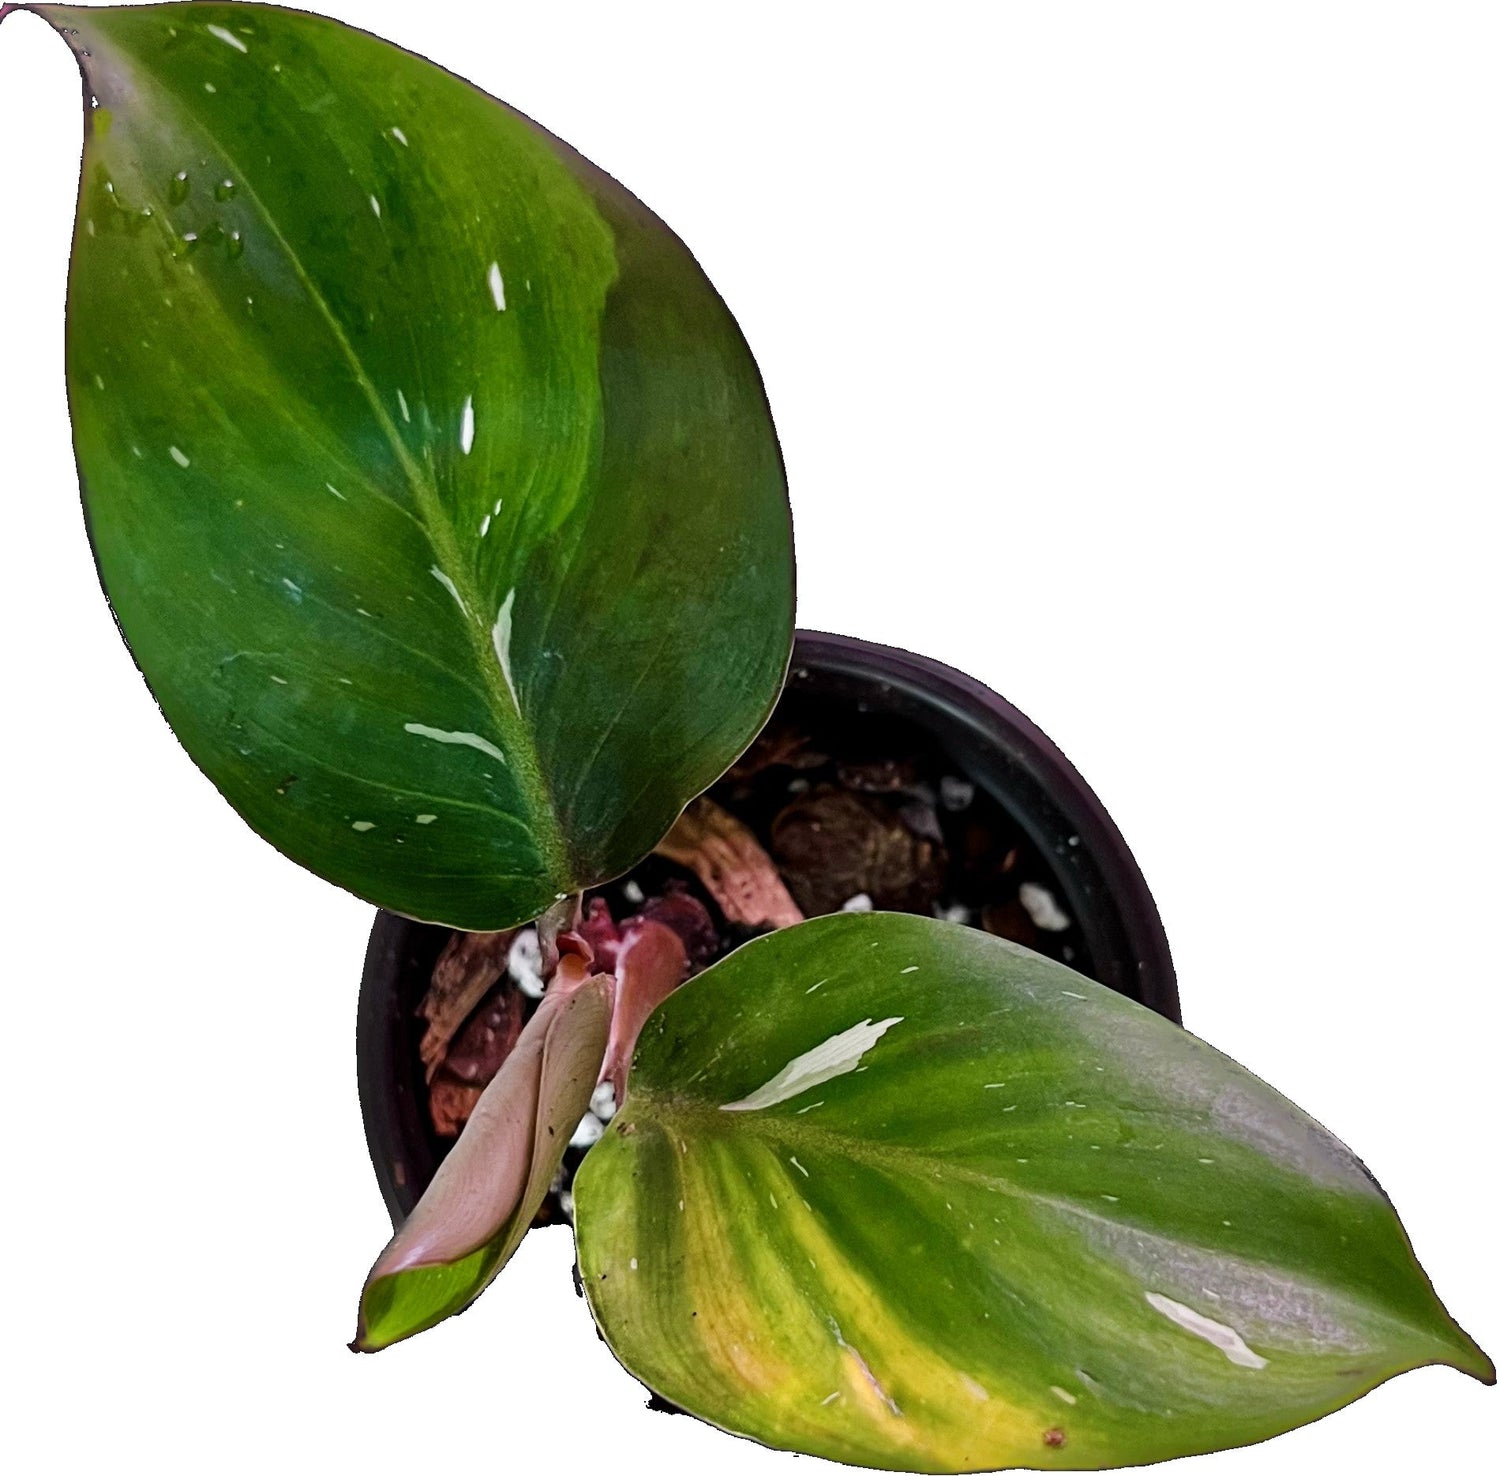 7 Easy Care tips for a Philodendron White Knight - PlantyTown